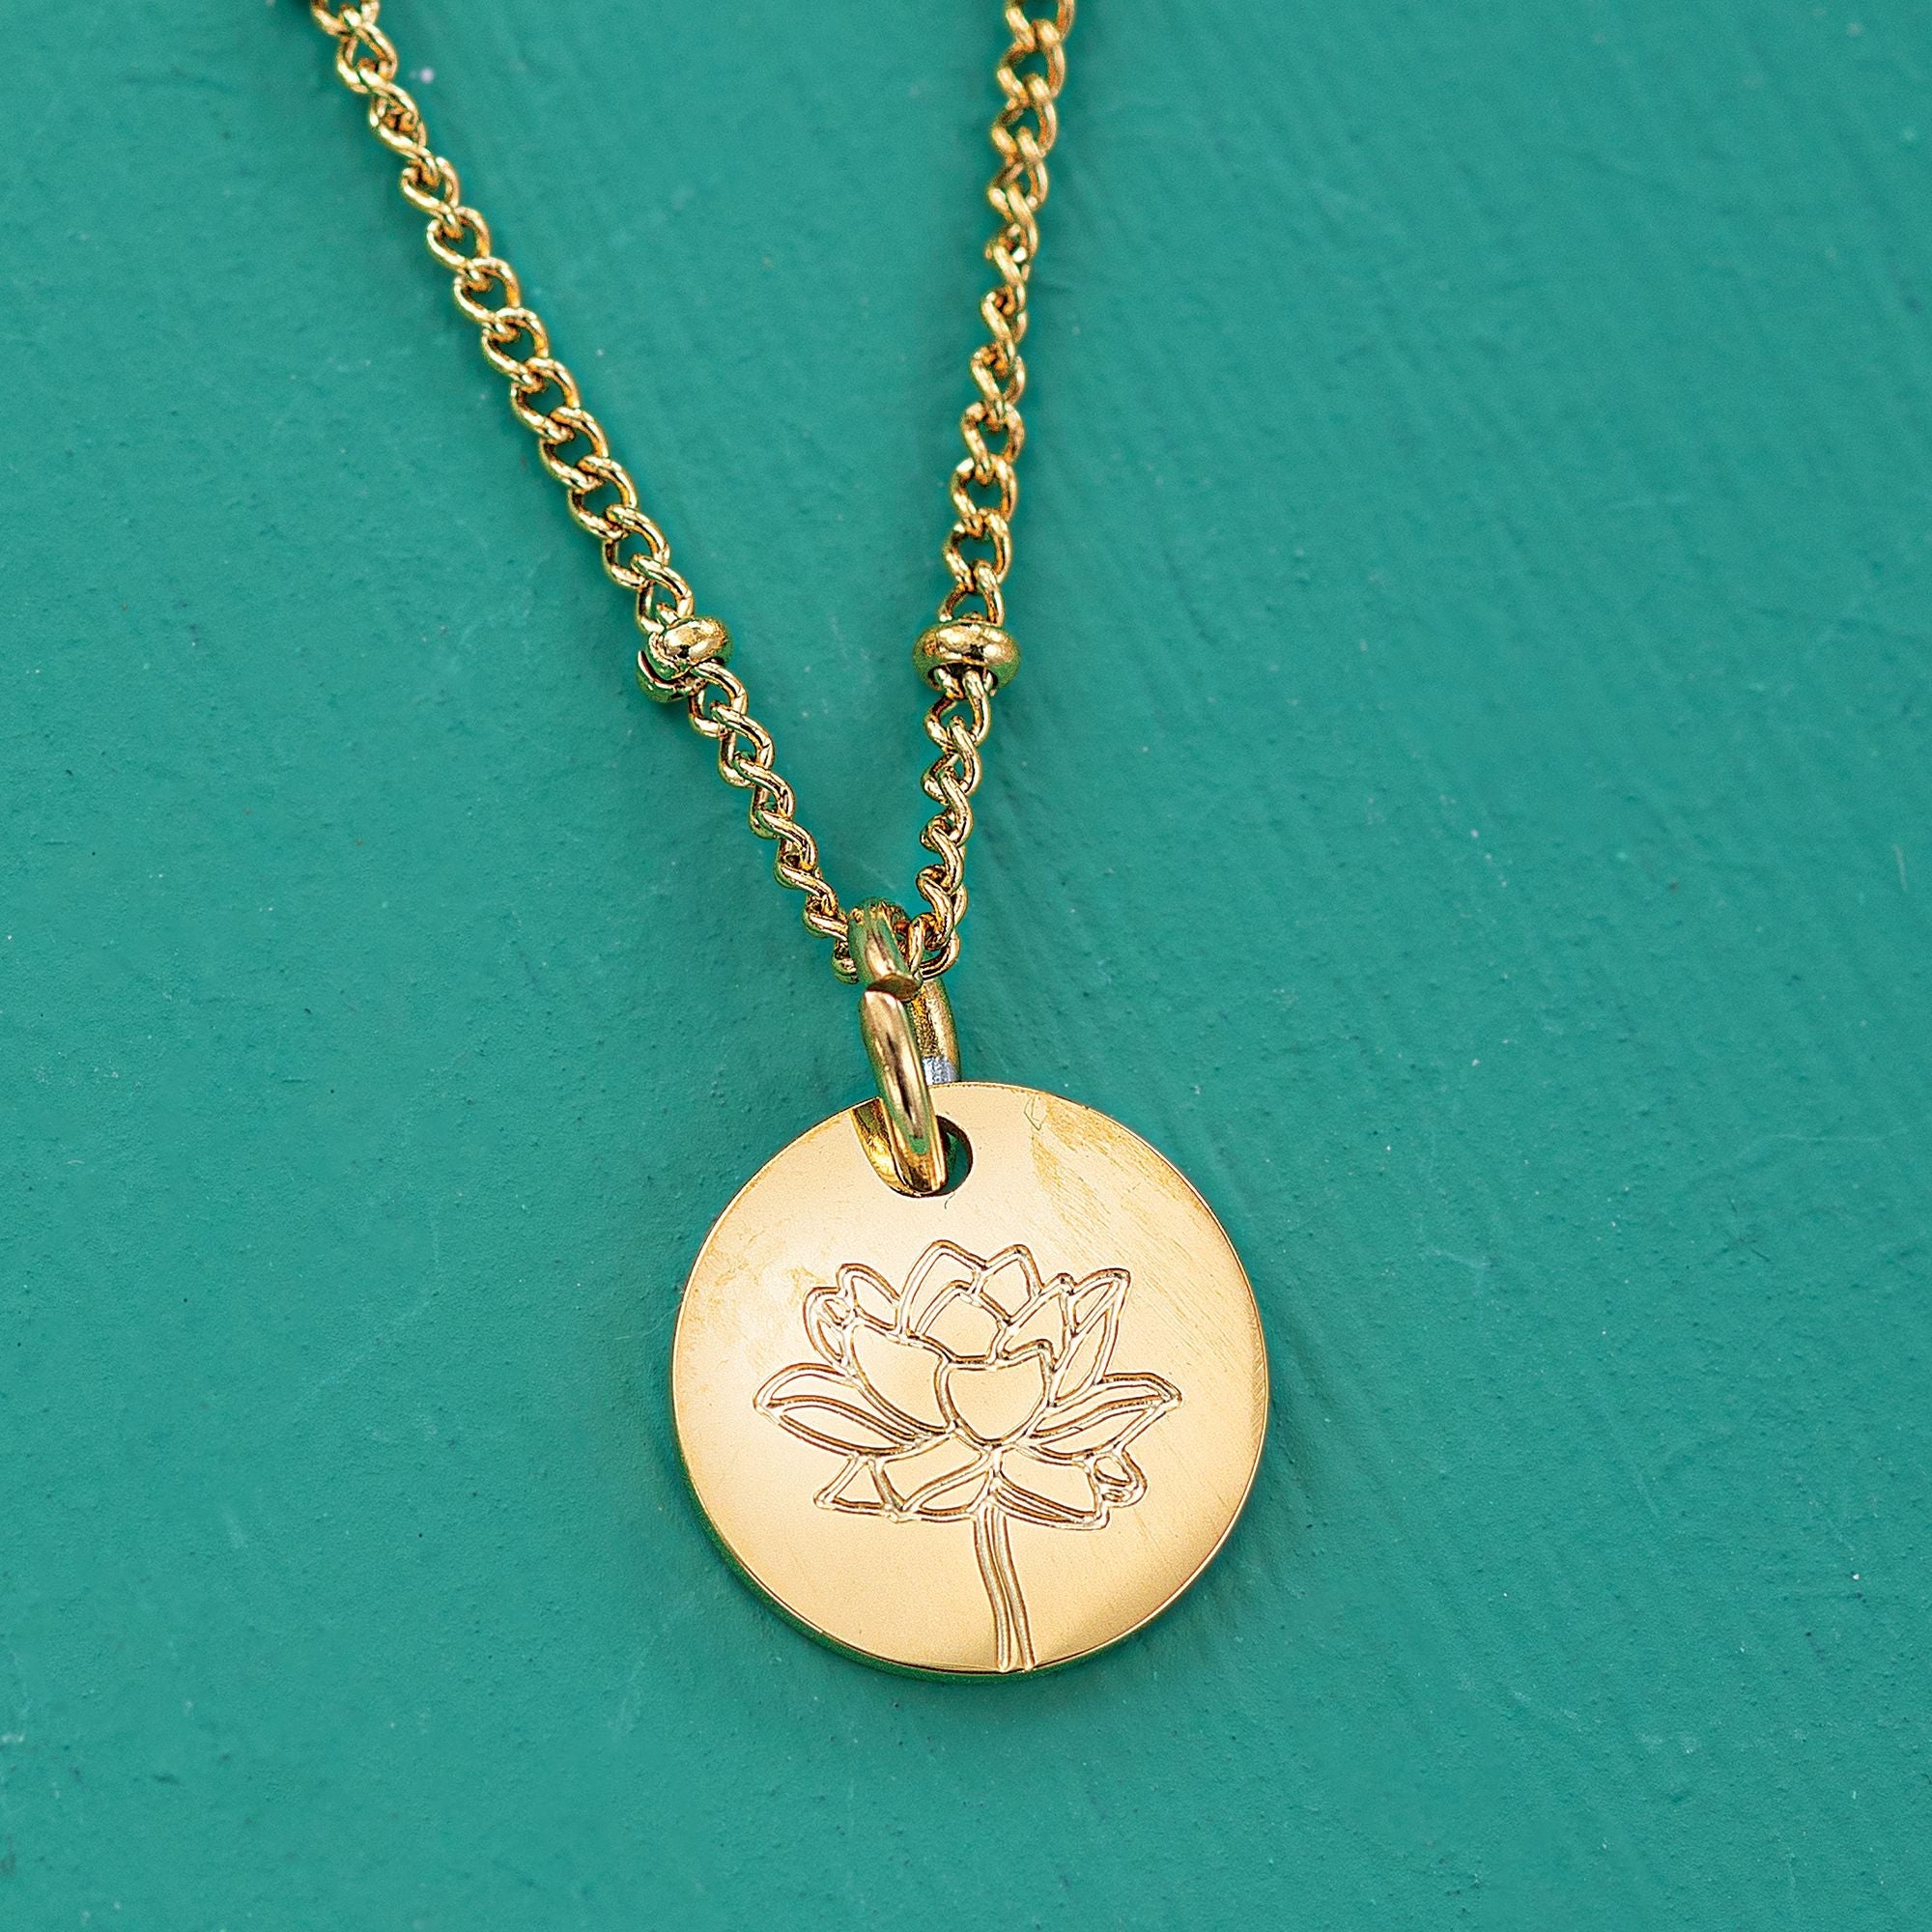 July Water Lily Birth Flower Charm Necklace